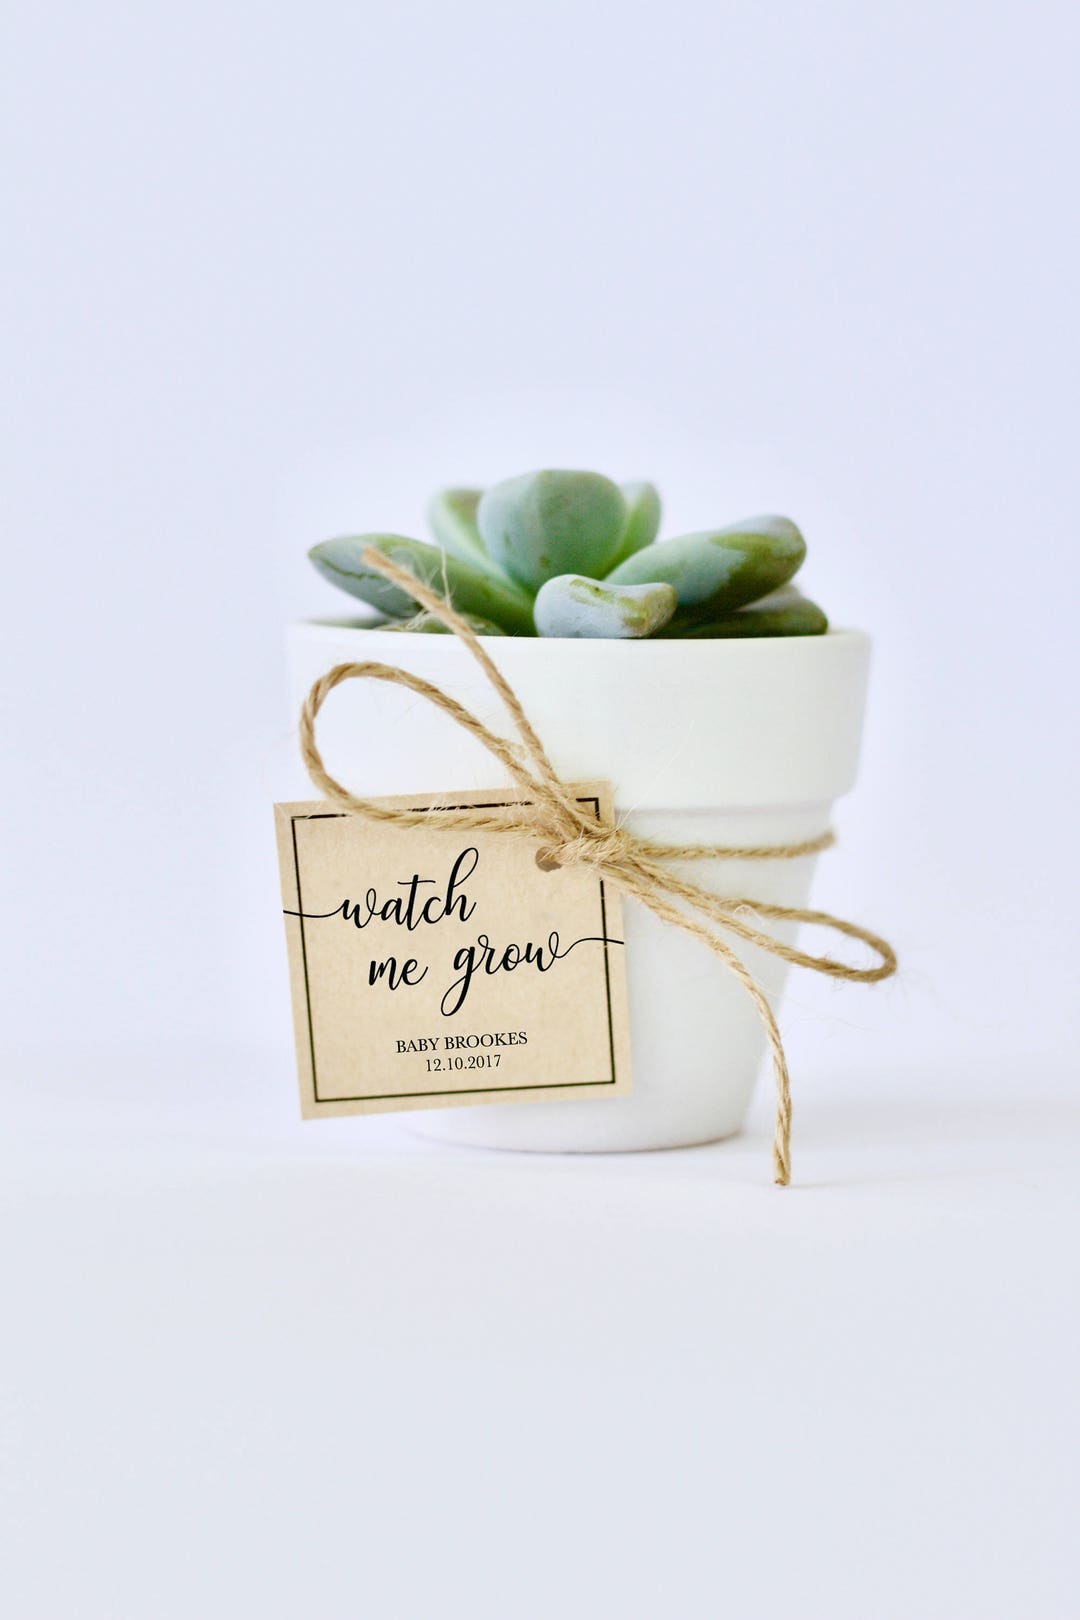 10 Free Baby Shower Gifts Every Mom Wants · Pint-sized Treasures